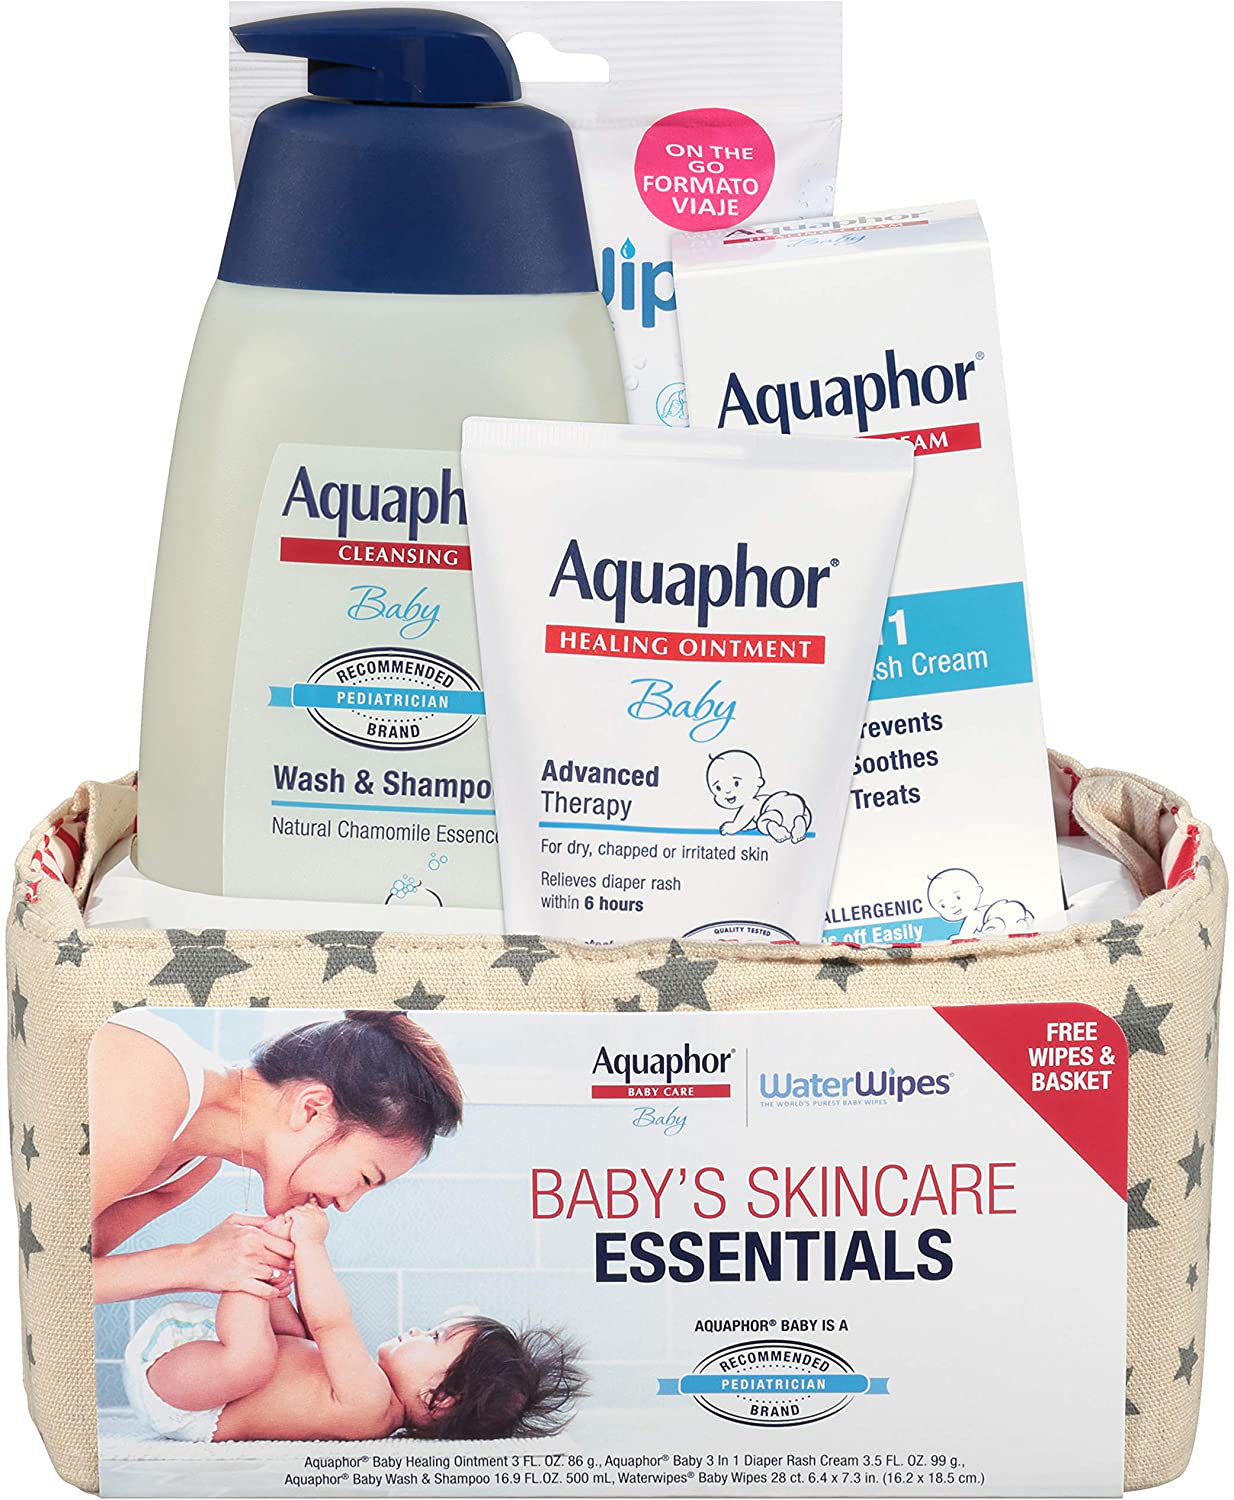 Aquaphor Baby Welcome Gift Set, Free WaterWipes and Bag Included, Healing Ointment, Wash & Shampoo, 3 in 1 Diaper Rash Cream, 5 Piece